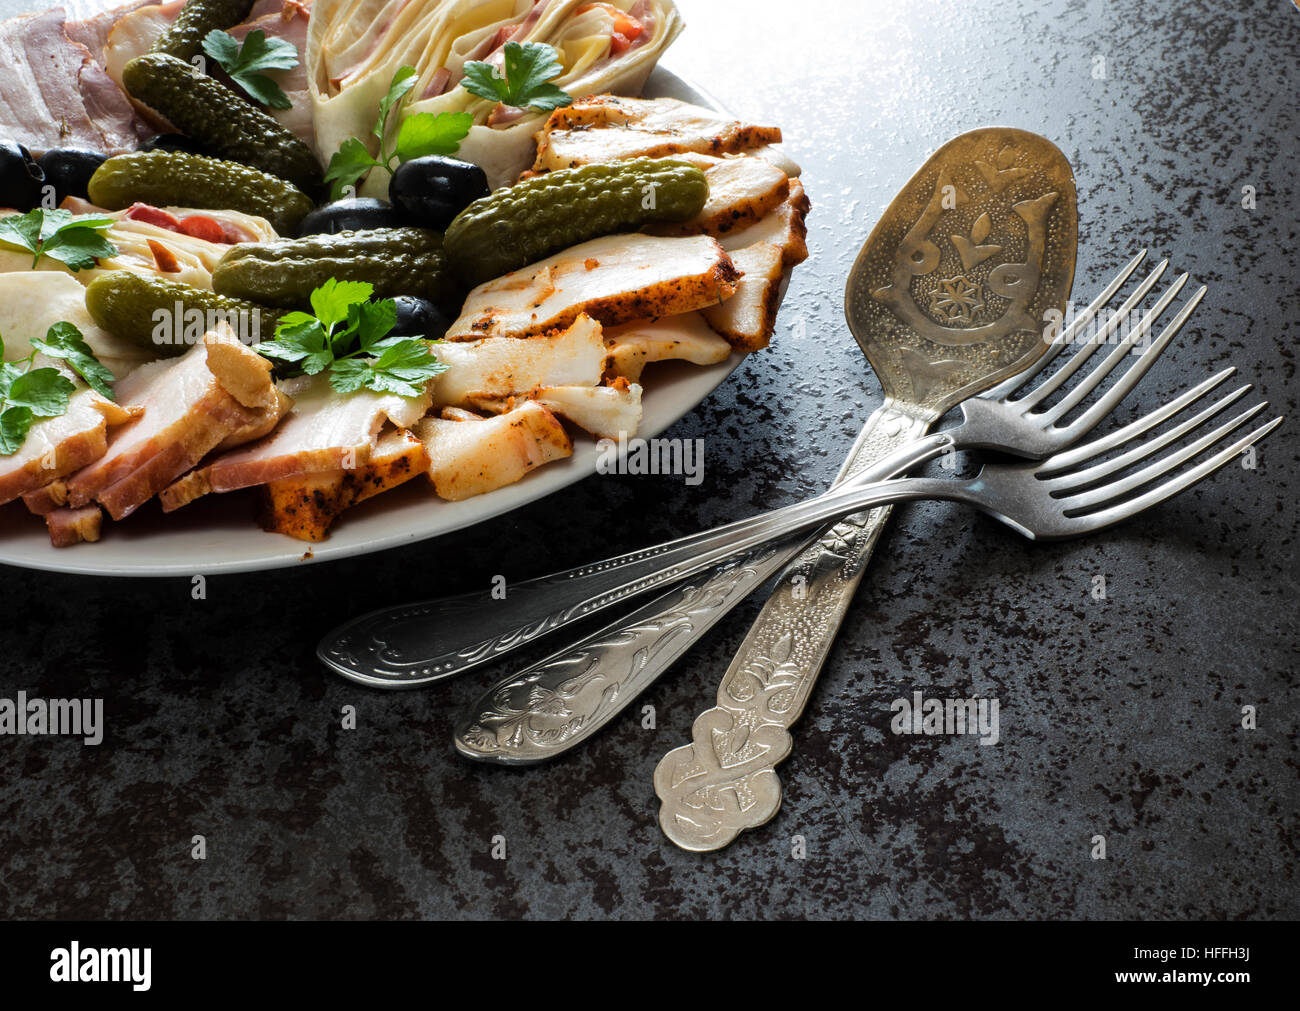 Plate of cold meats with ham, bacon, olives and pickles Stock Photo